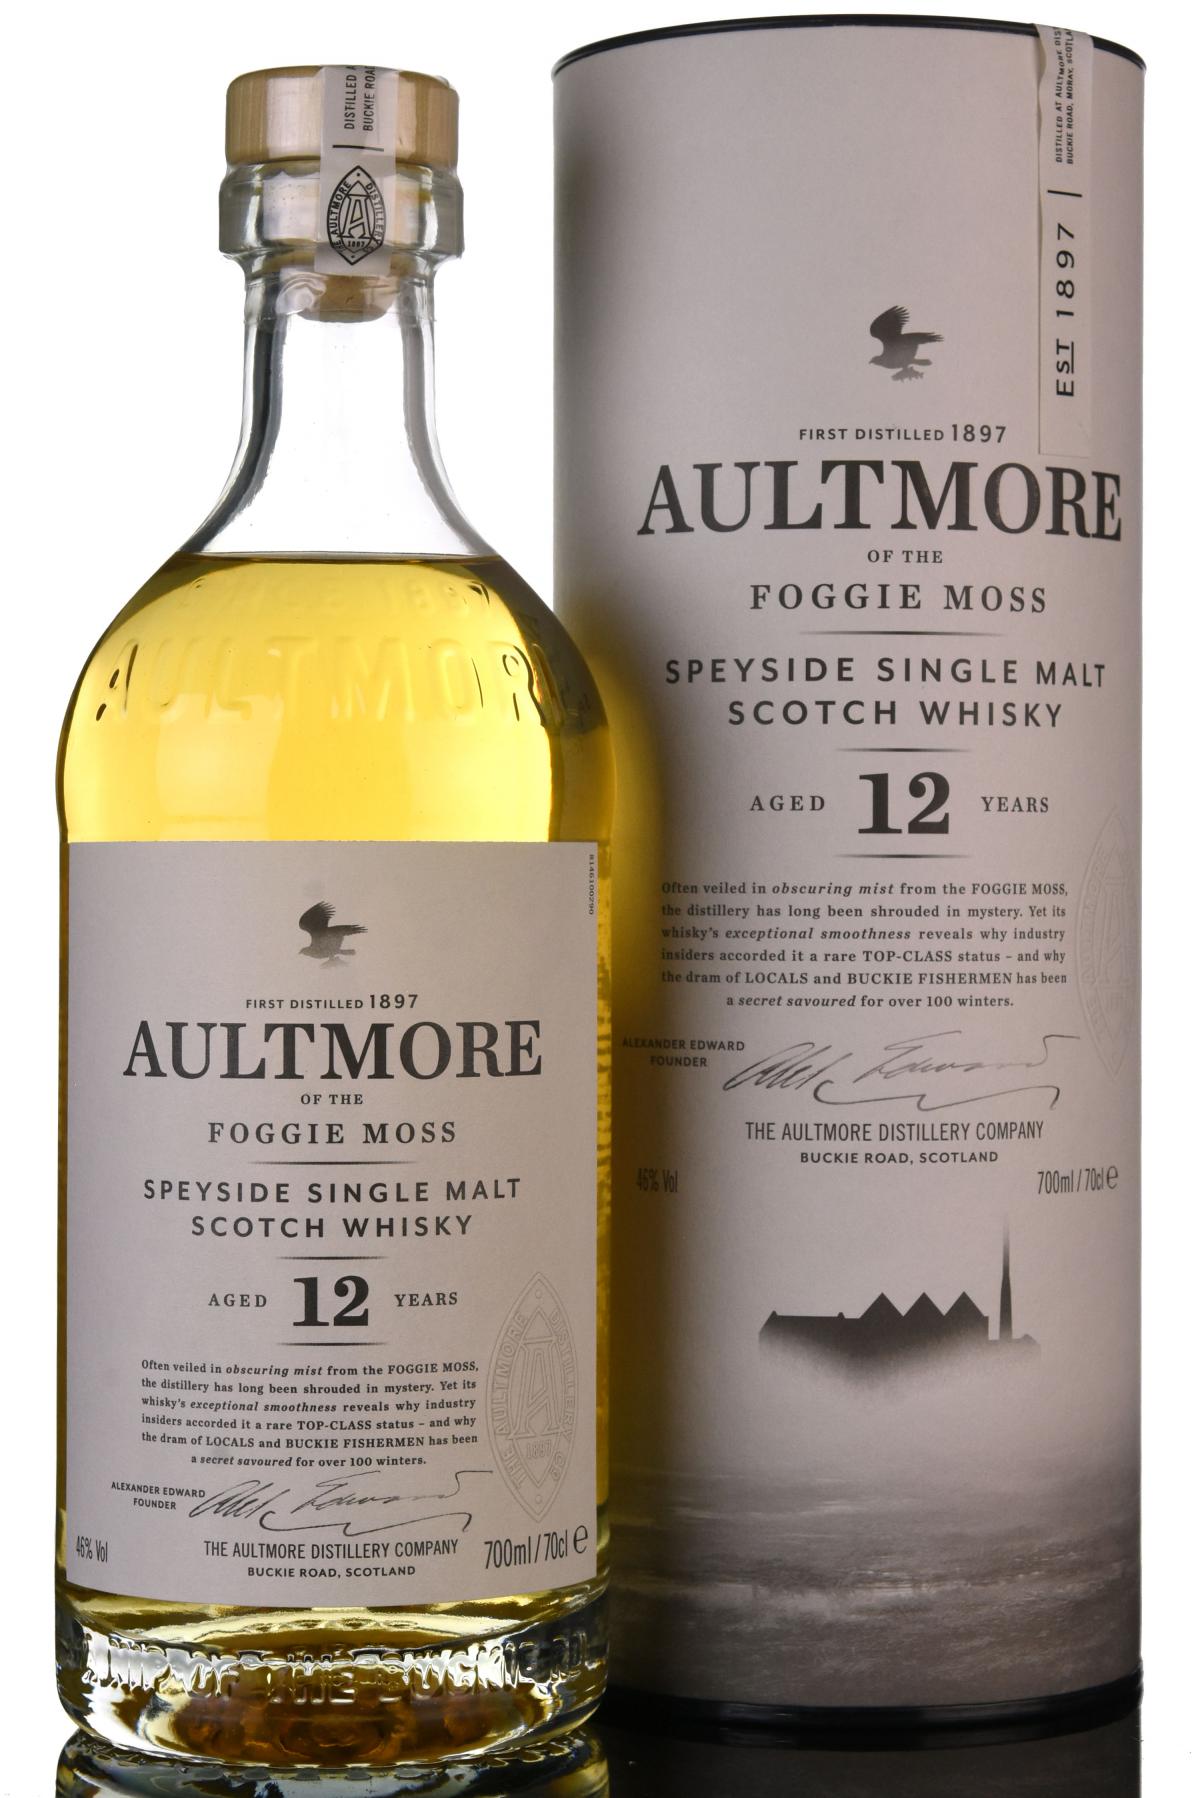 Aultmore 12 Year Old Foggie Moss